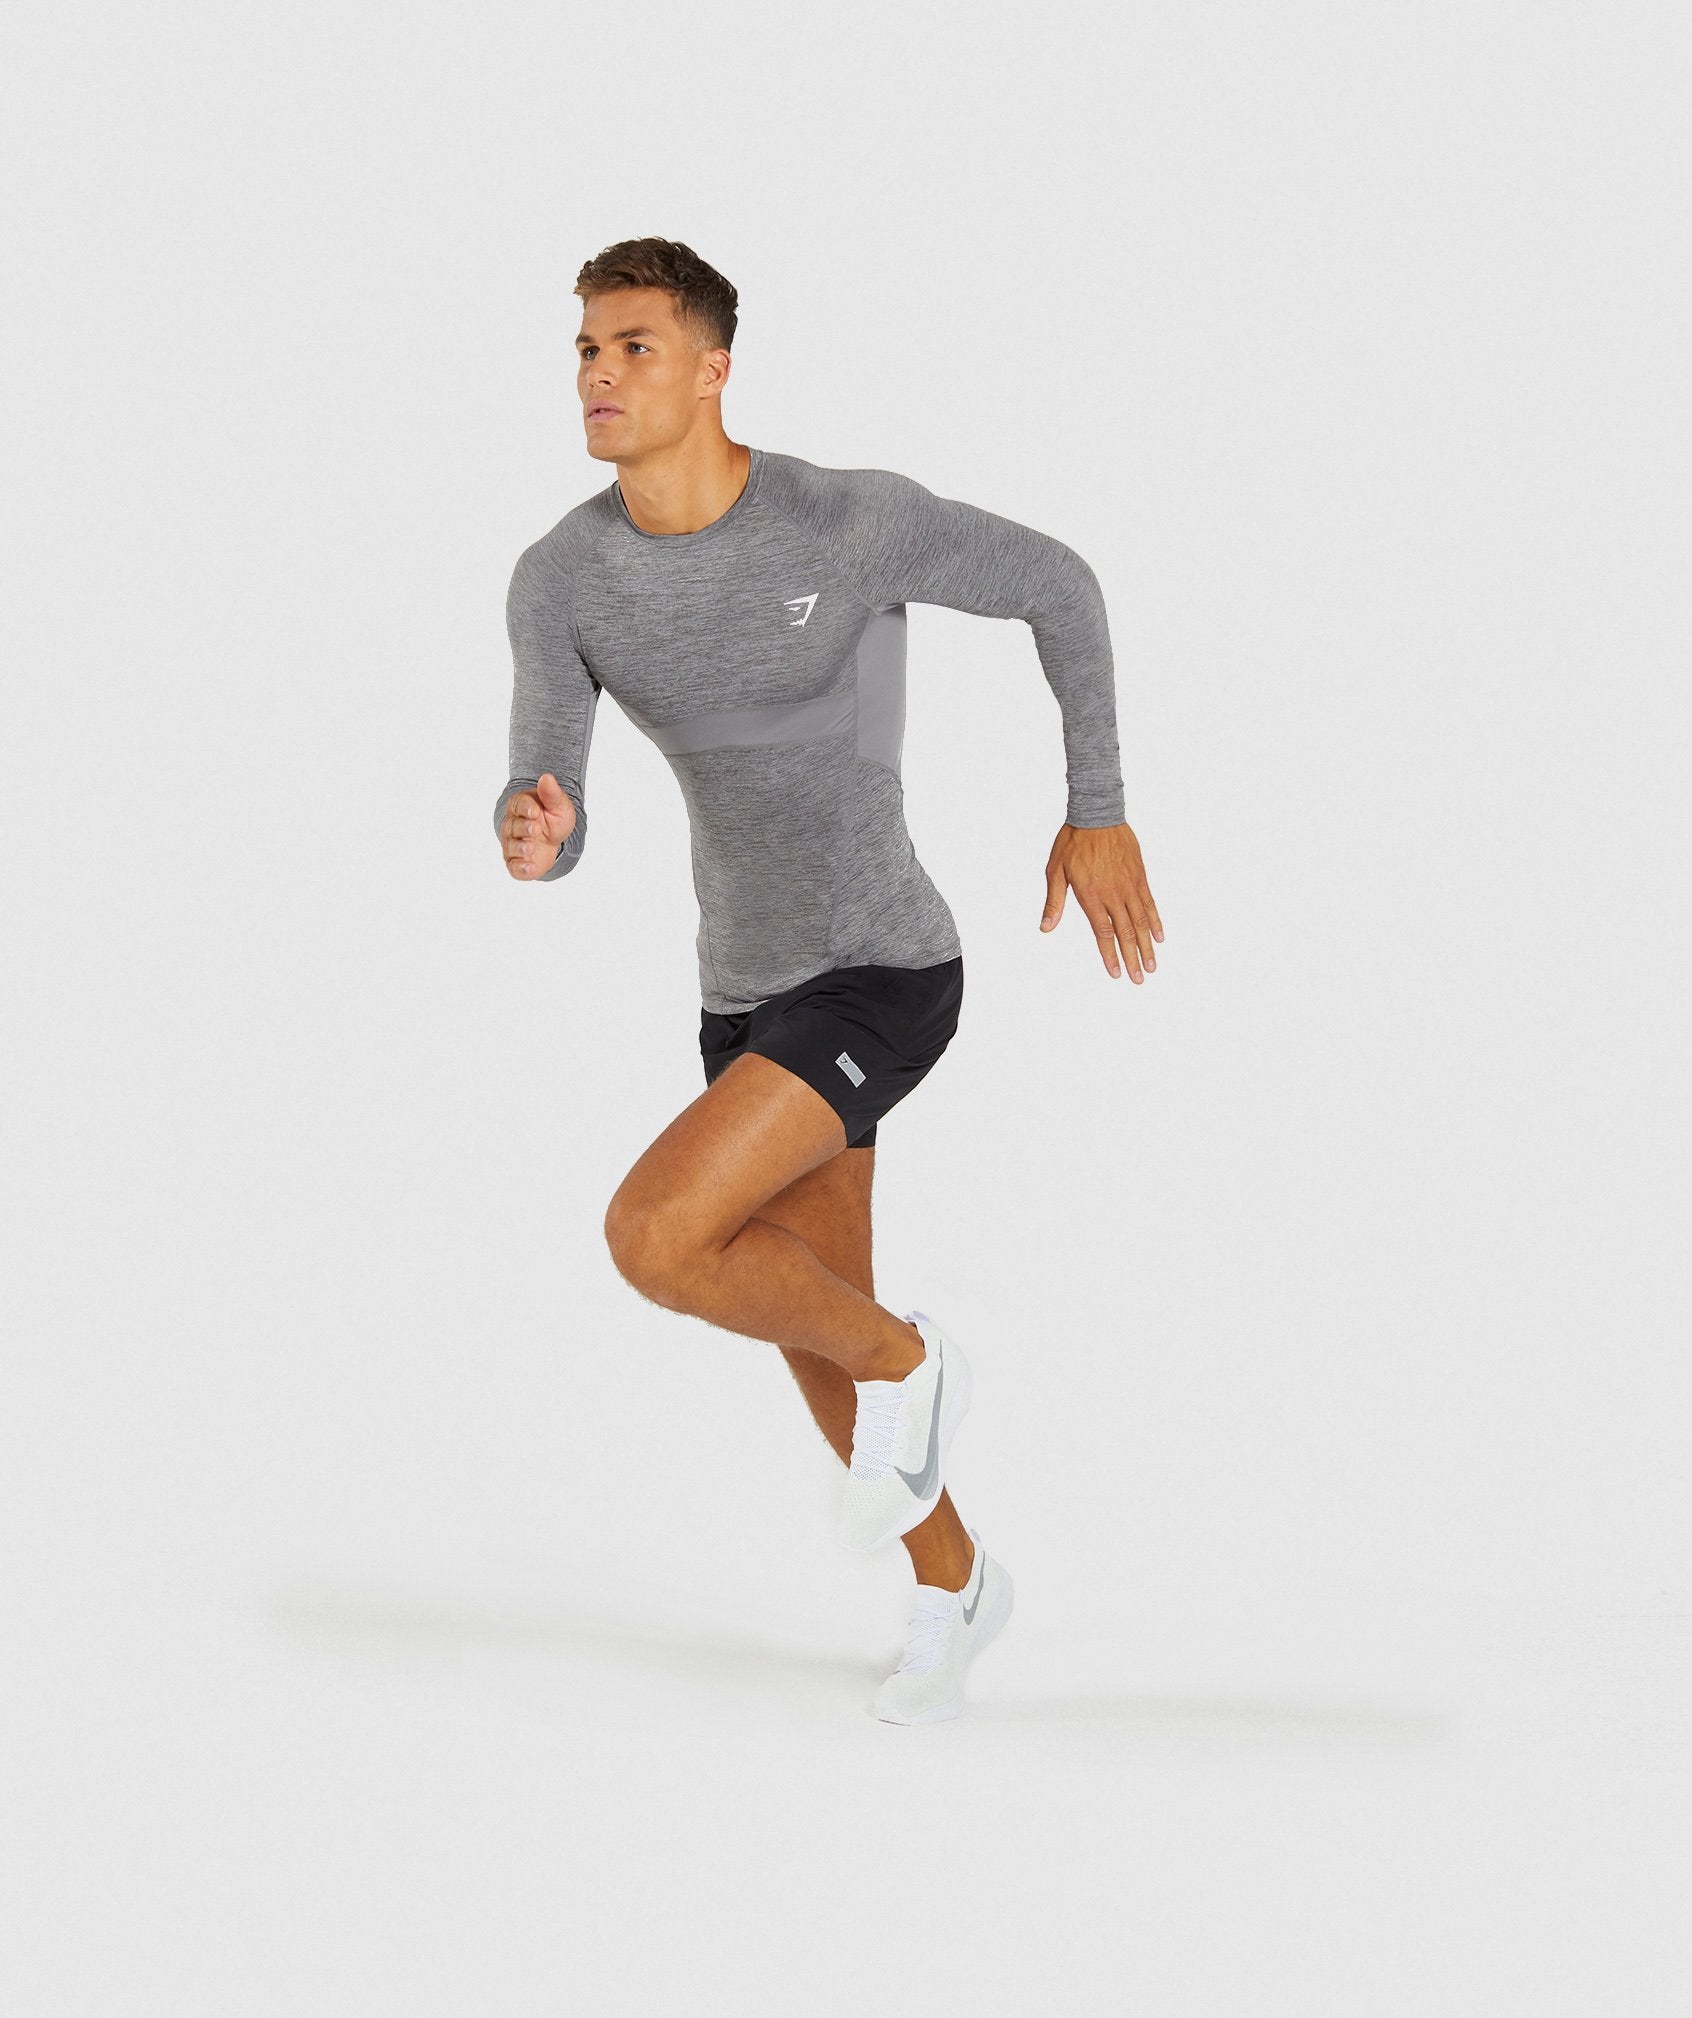 Element+ Baselayer Long Sleeve Top in Smokey Grey Marl - view 4